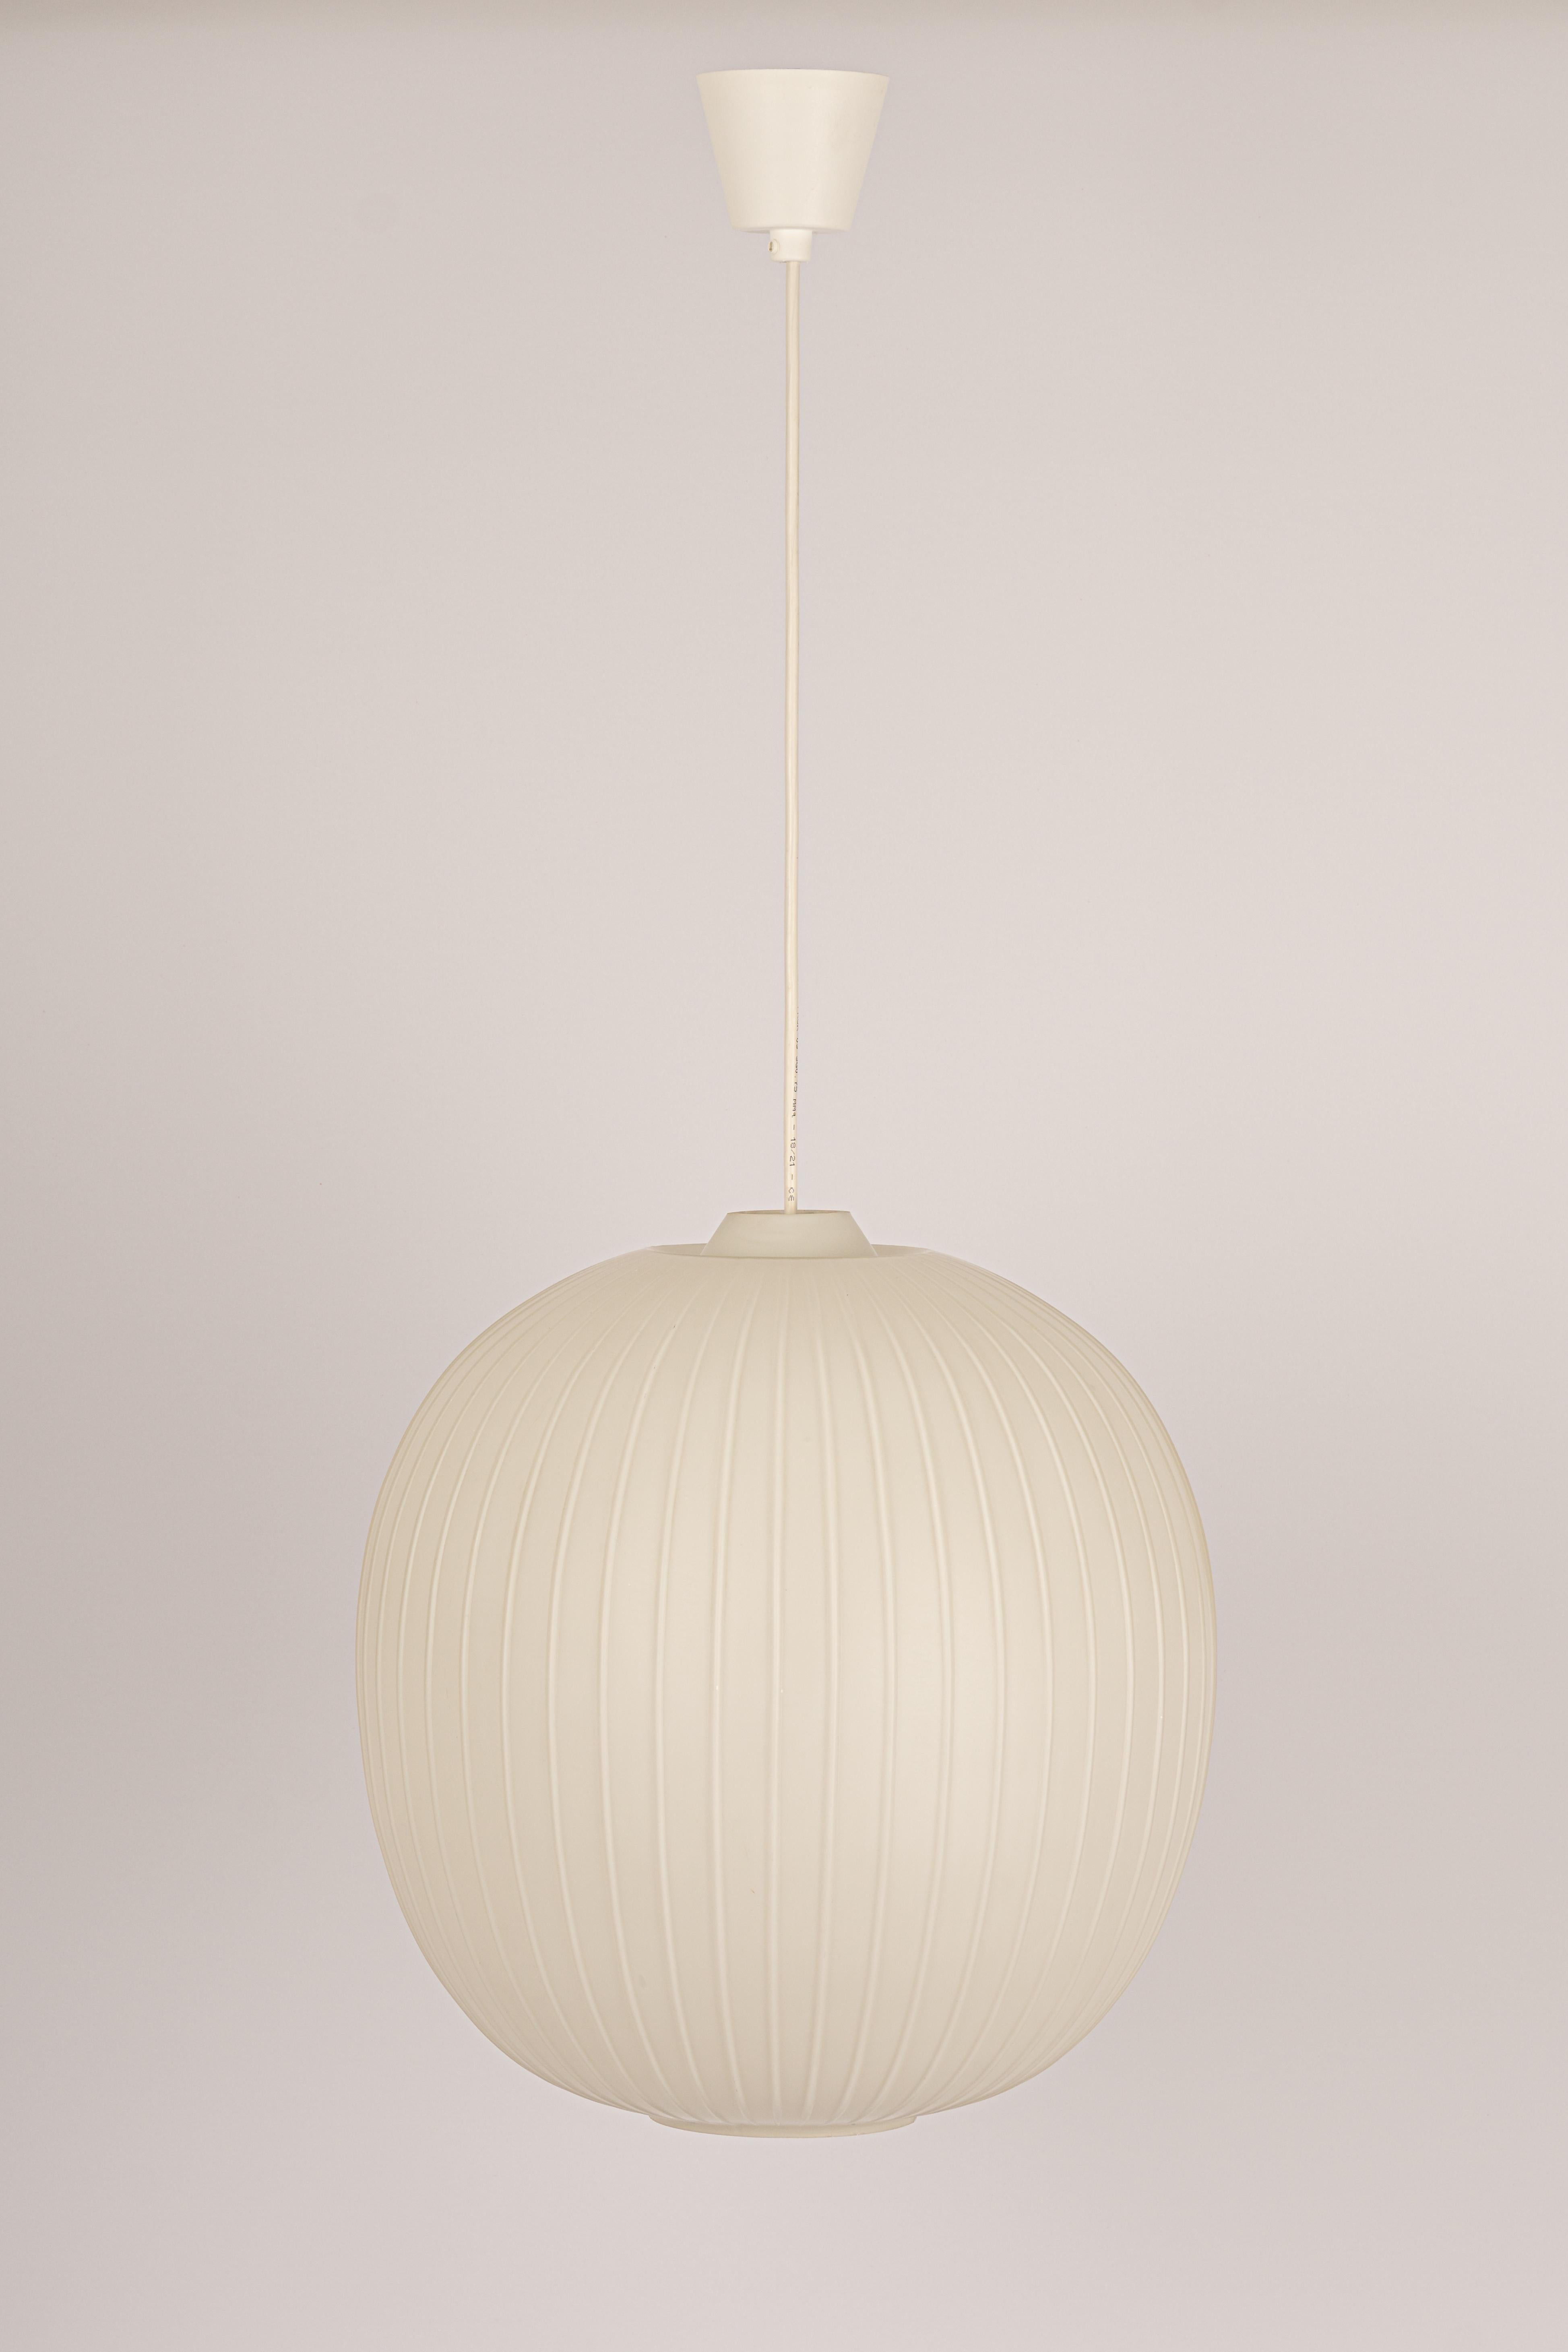 Stunning Bologna Pendant light designed by Aloys F. Gangkofner for Peill & Putzler , Germany, 1950s
He designed this series: Bologna - between 1953 -1958 

Sockets: One x E27 standard bulb. (100 W max).
Light bulbs are not included. It is